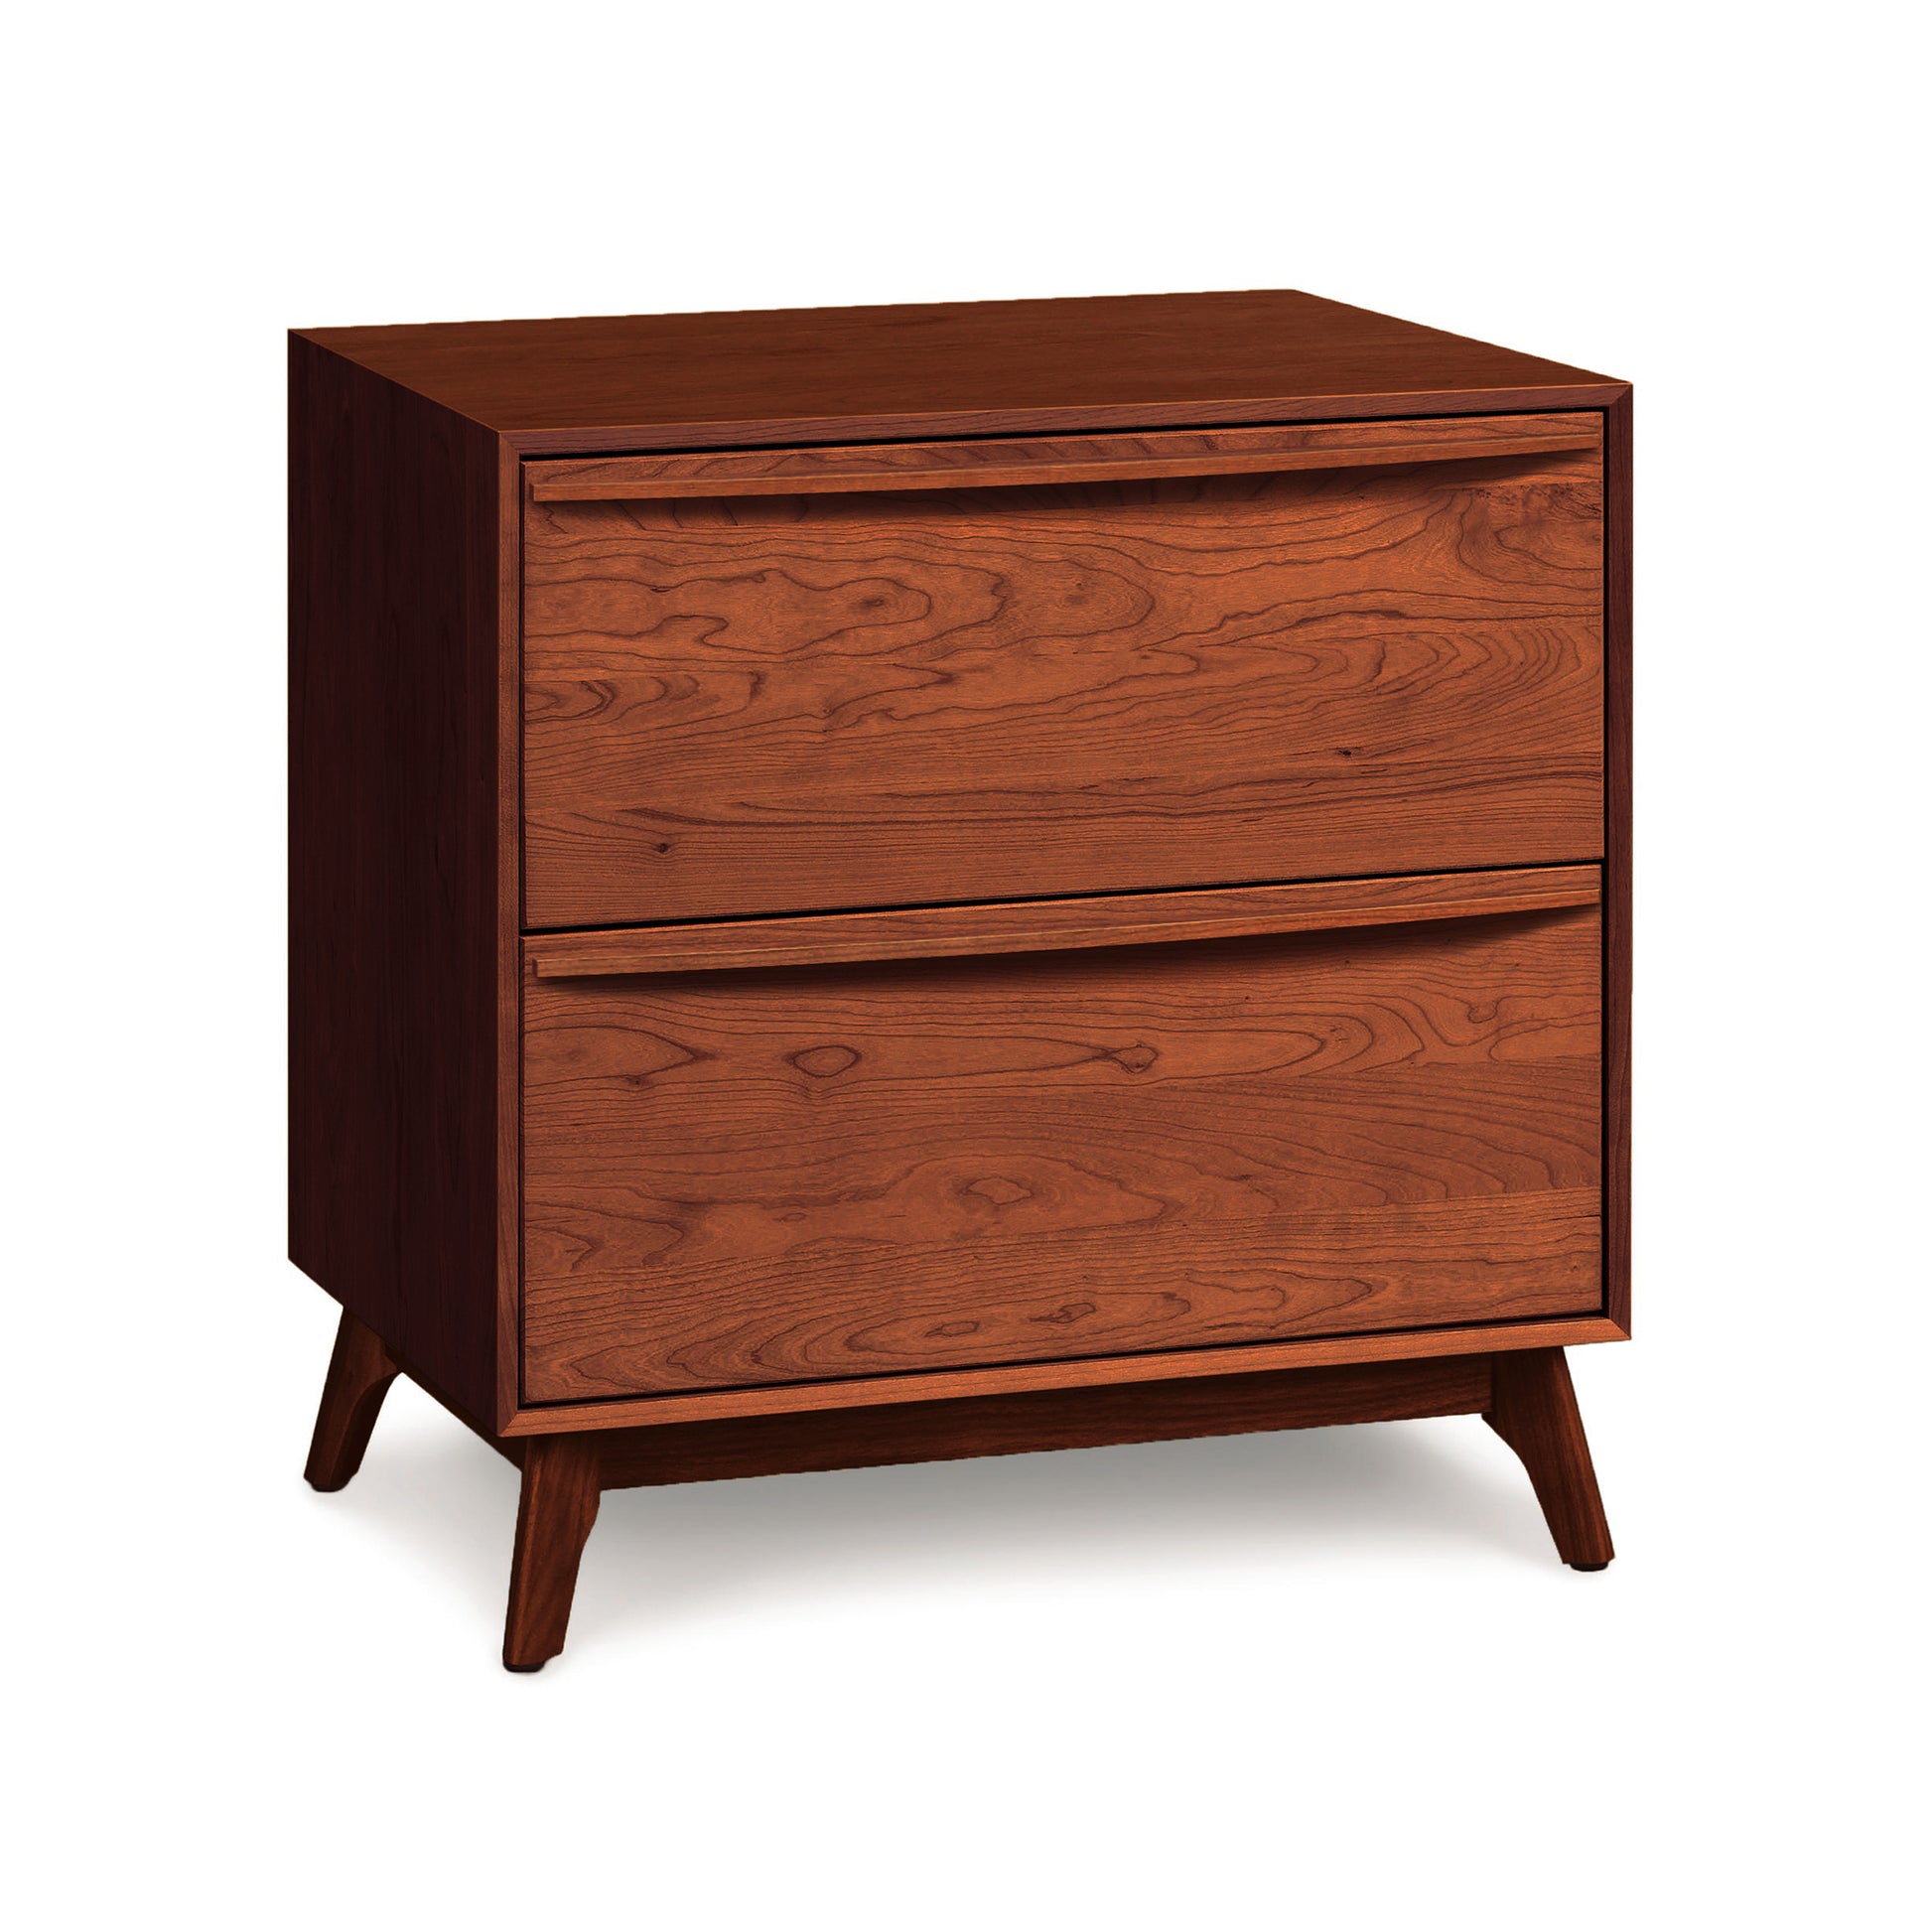 The Copeland Furniture Catalina 2-Drawer Nightstand is a contemporary style wooden nightstand handmade in Bradford.